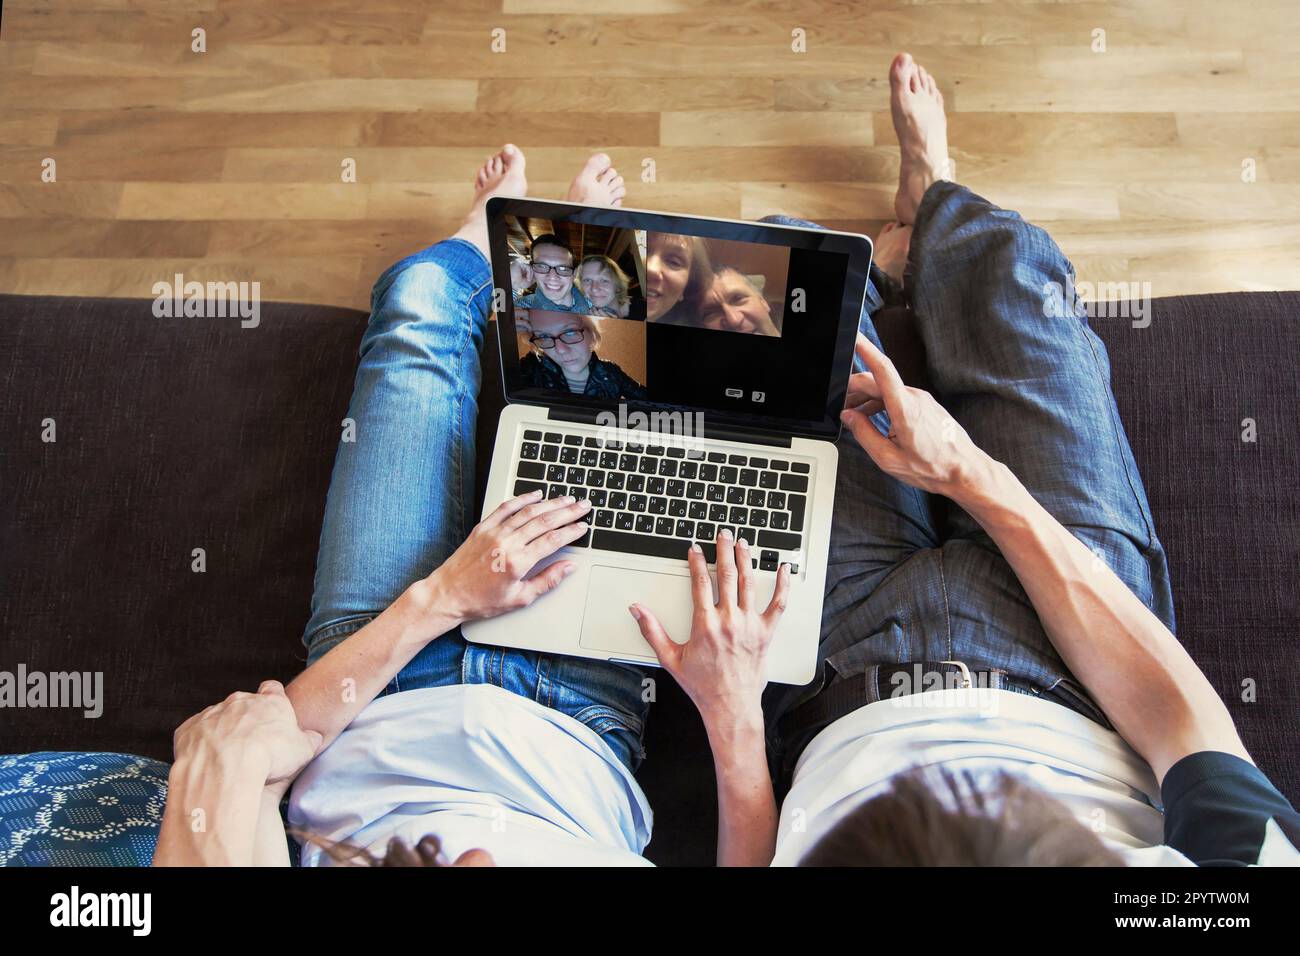 group video call with family and friends, couple sitting on the couch using laptop computer Stock Photo